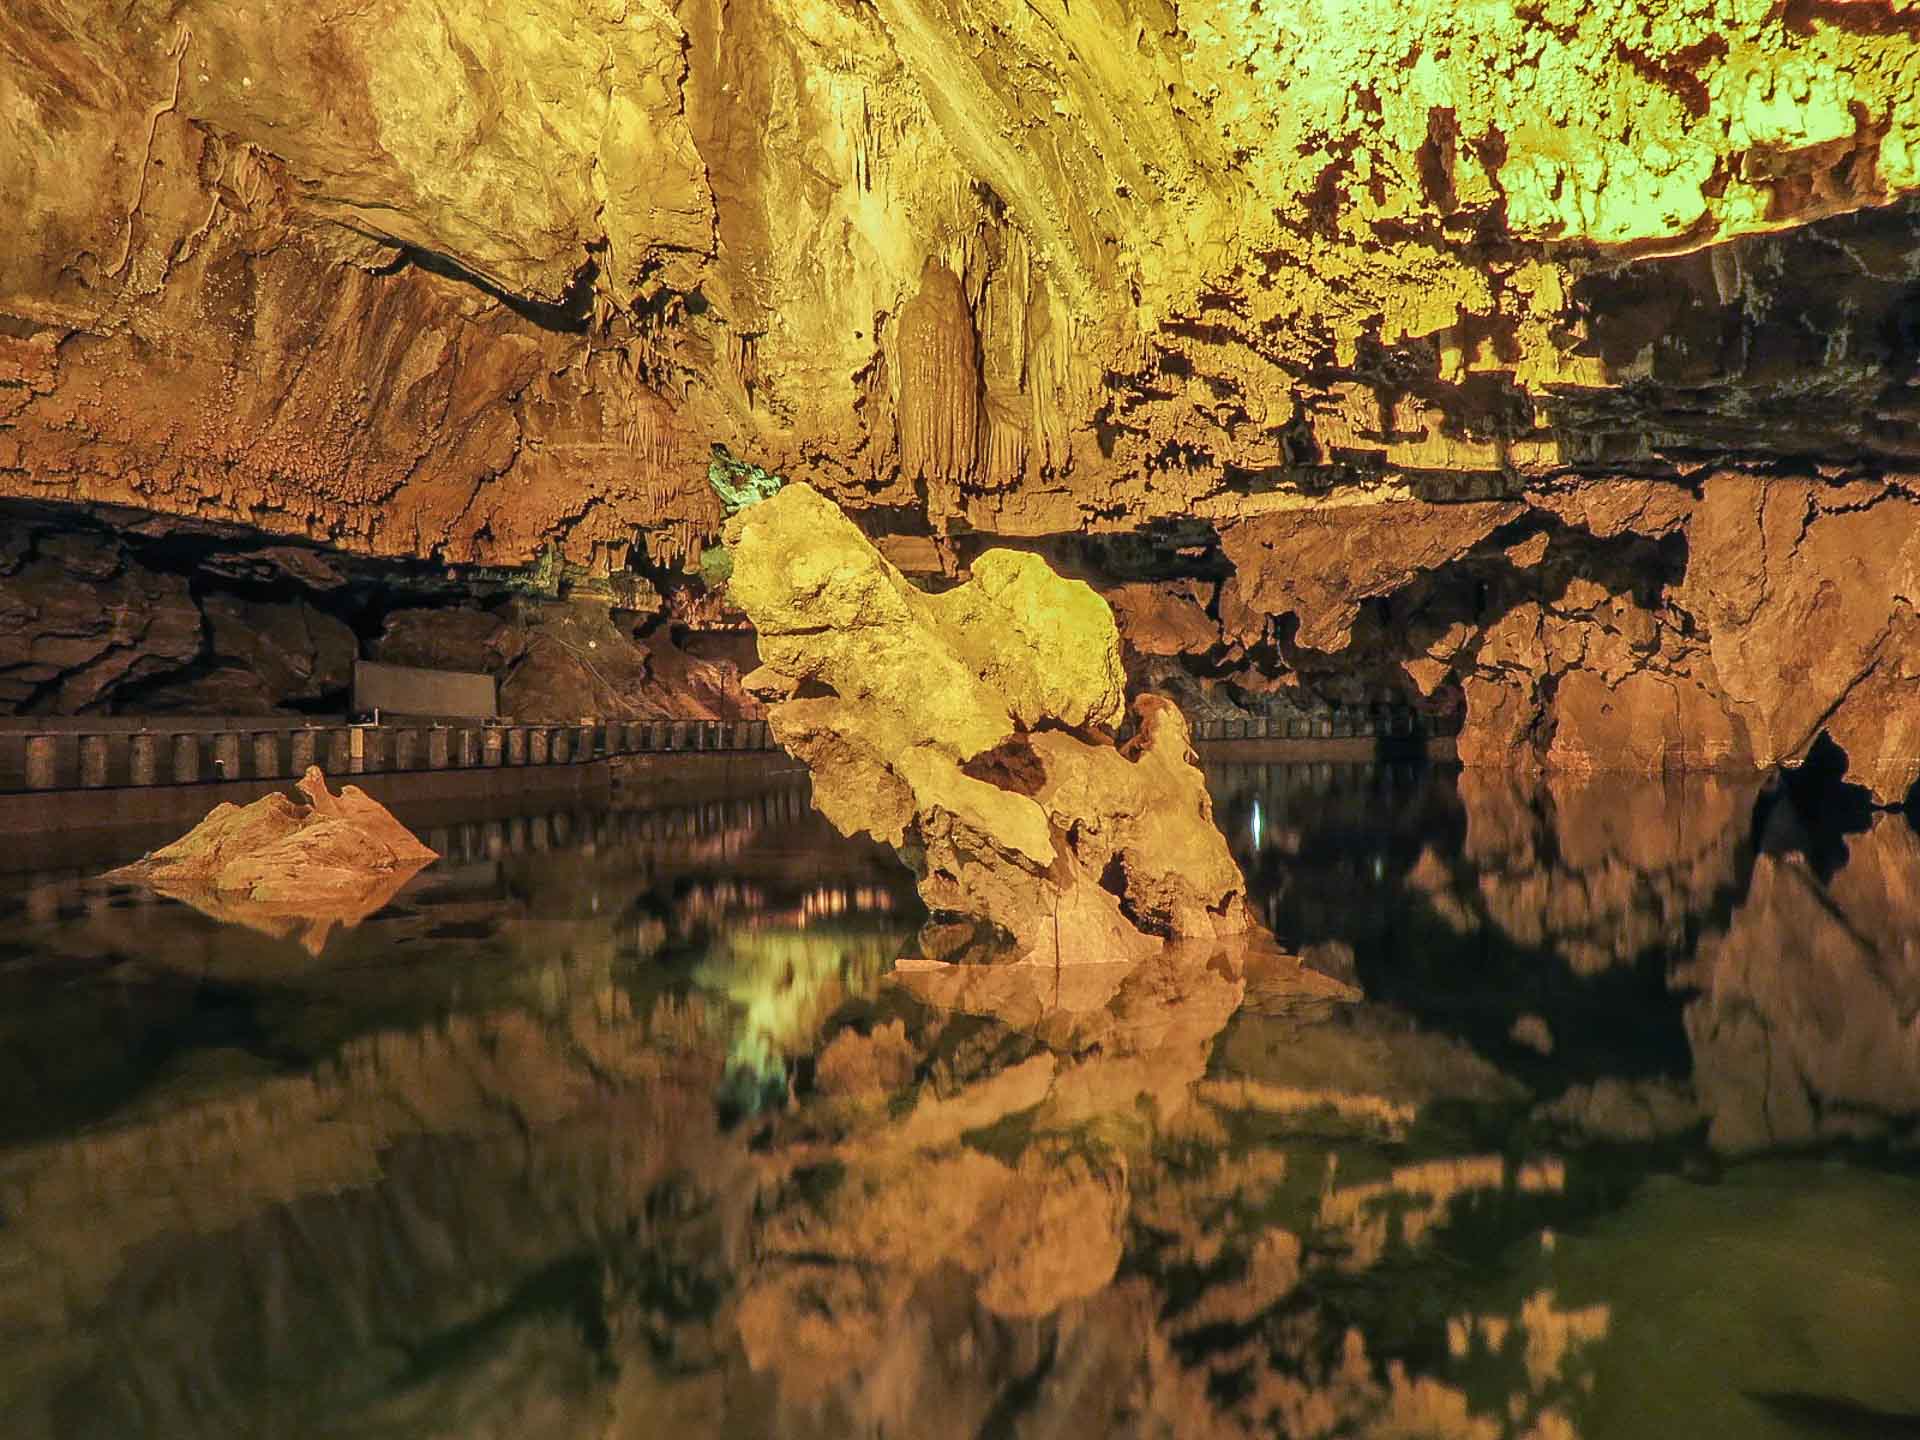 Inside Ali Sard Cave, the largest water cave in the world